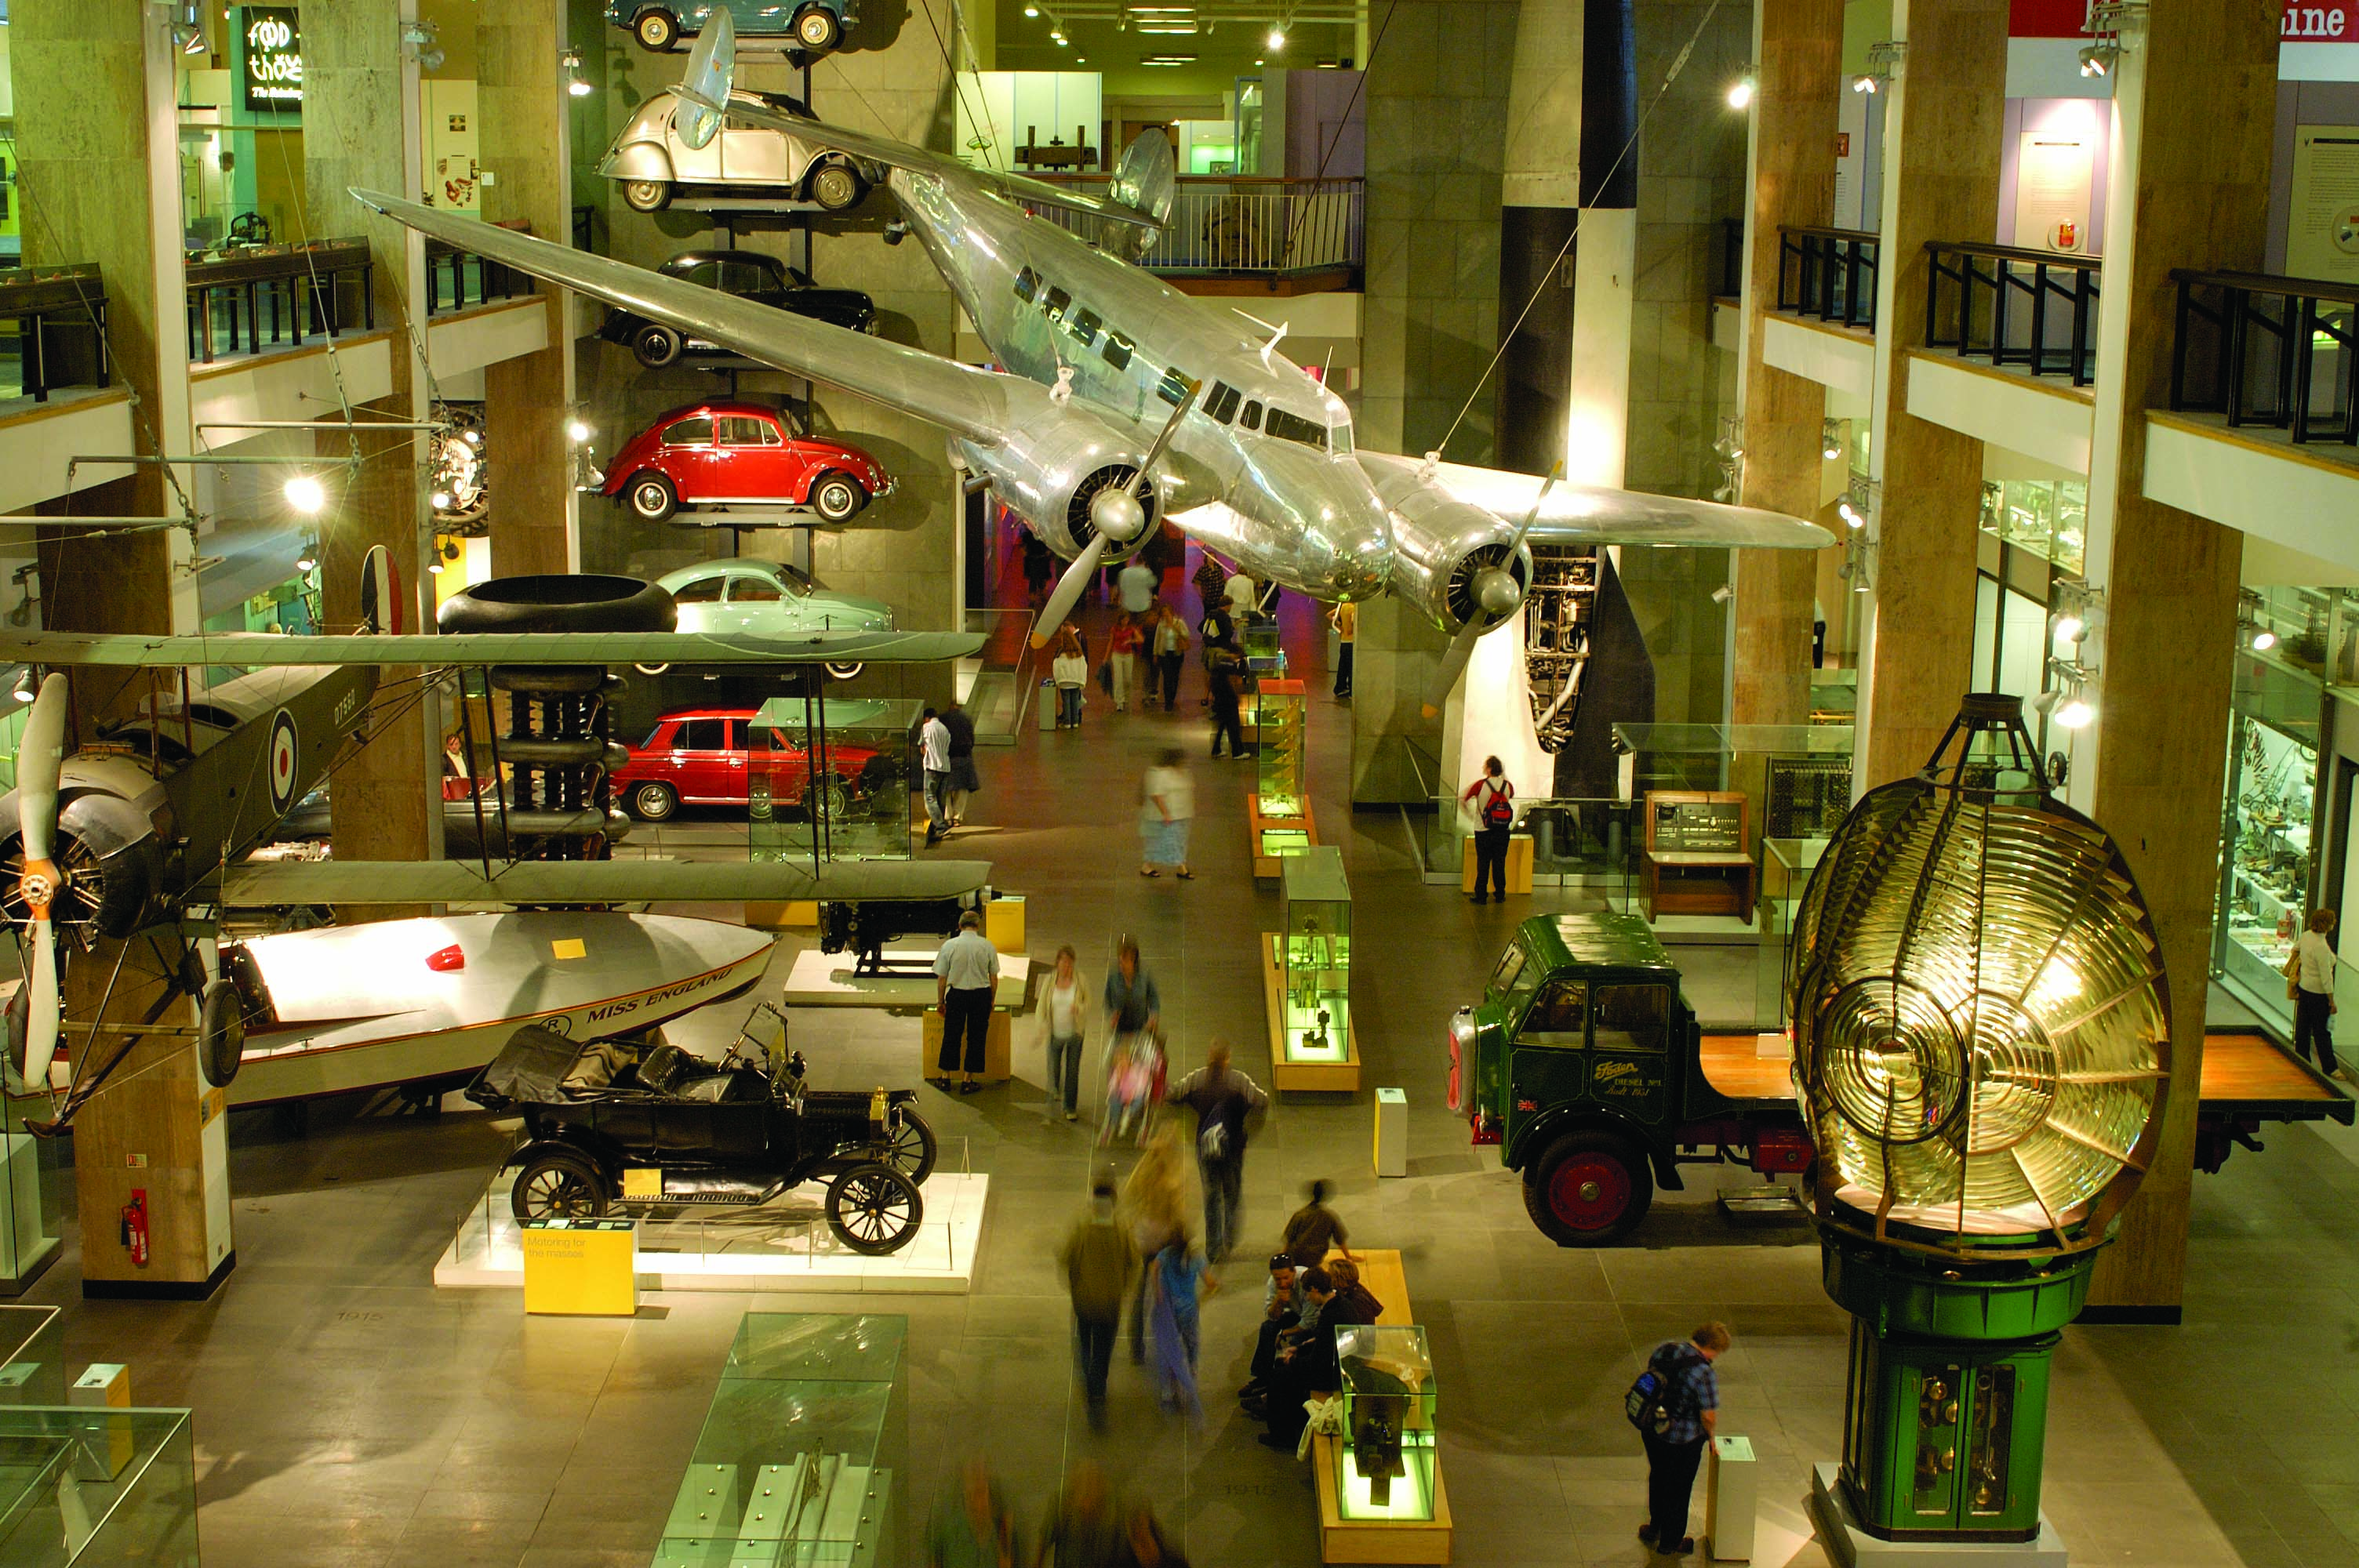 Visitors in the Making the Modern World gallery. Image credit: Science Museum